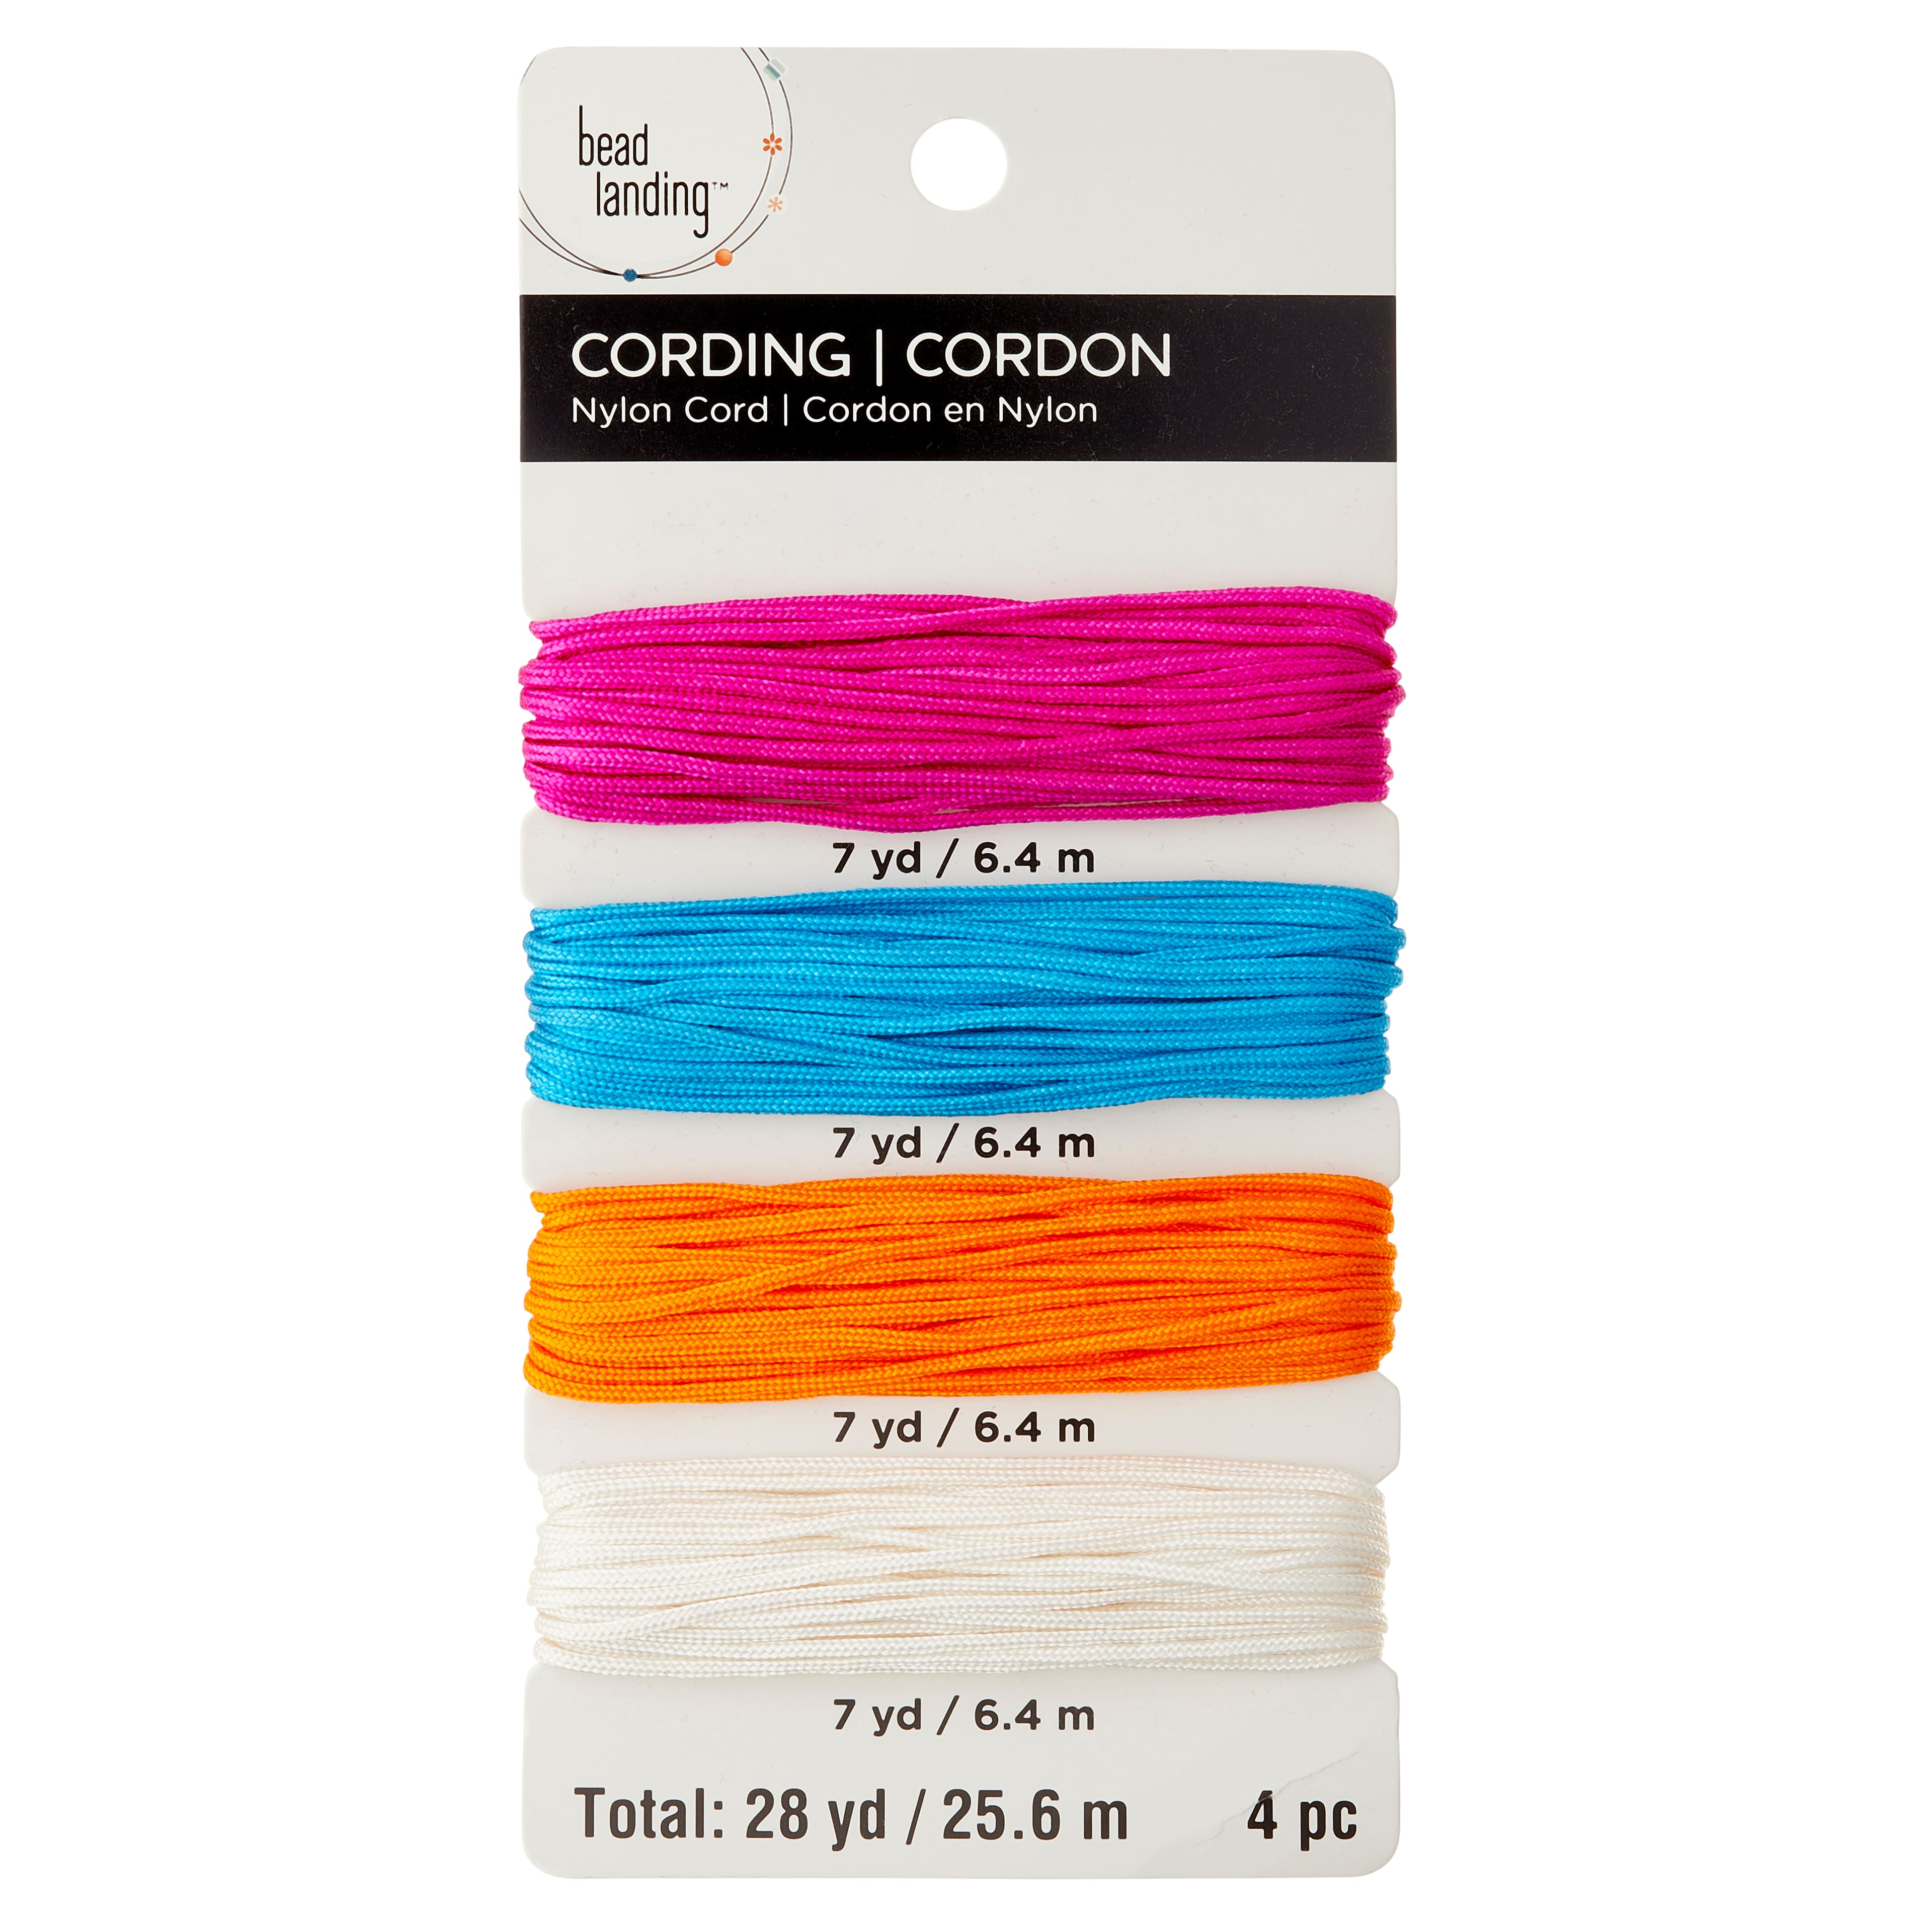 6 Packs: 4 ct. (24 total) 1.5mm Brights Nylon Cording by Bead